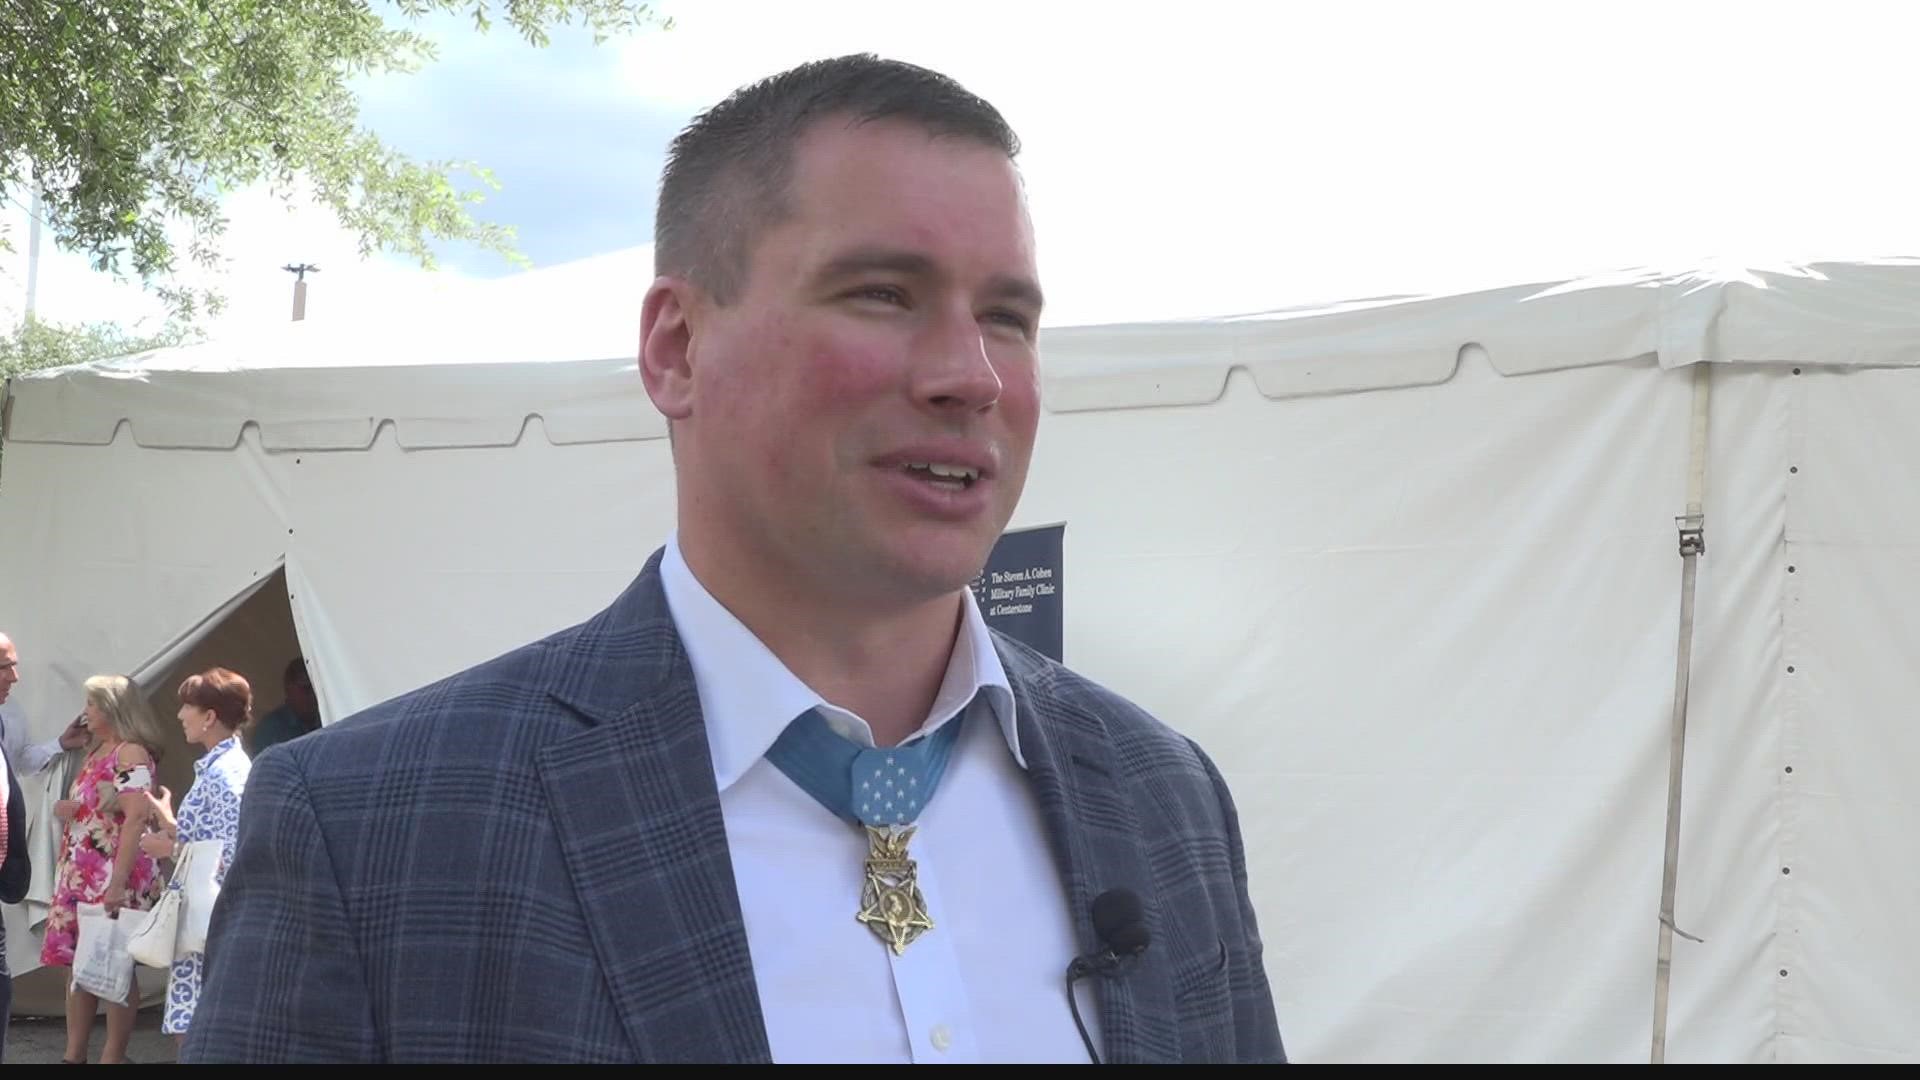 A medal of honor recipient Sergeant Kyle White spoke about the critical need for PTSD and other mental health care for the military. He says, it saved his life.